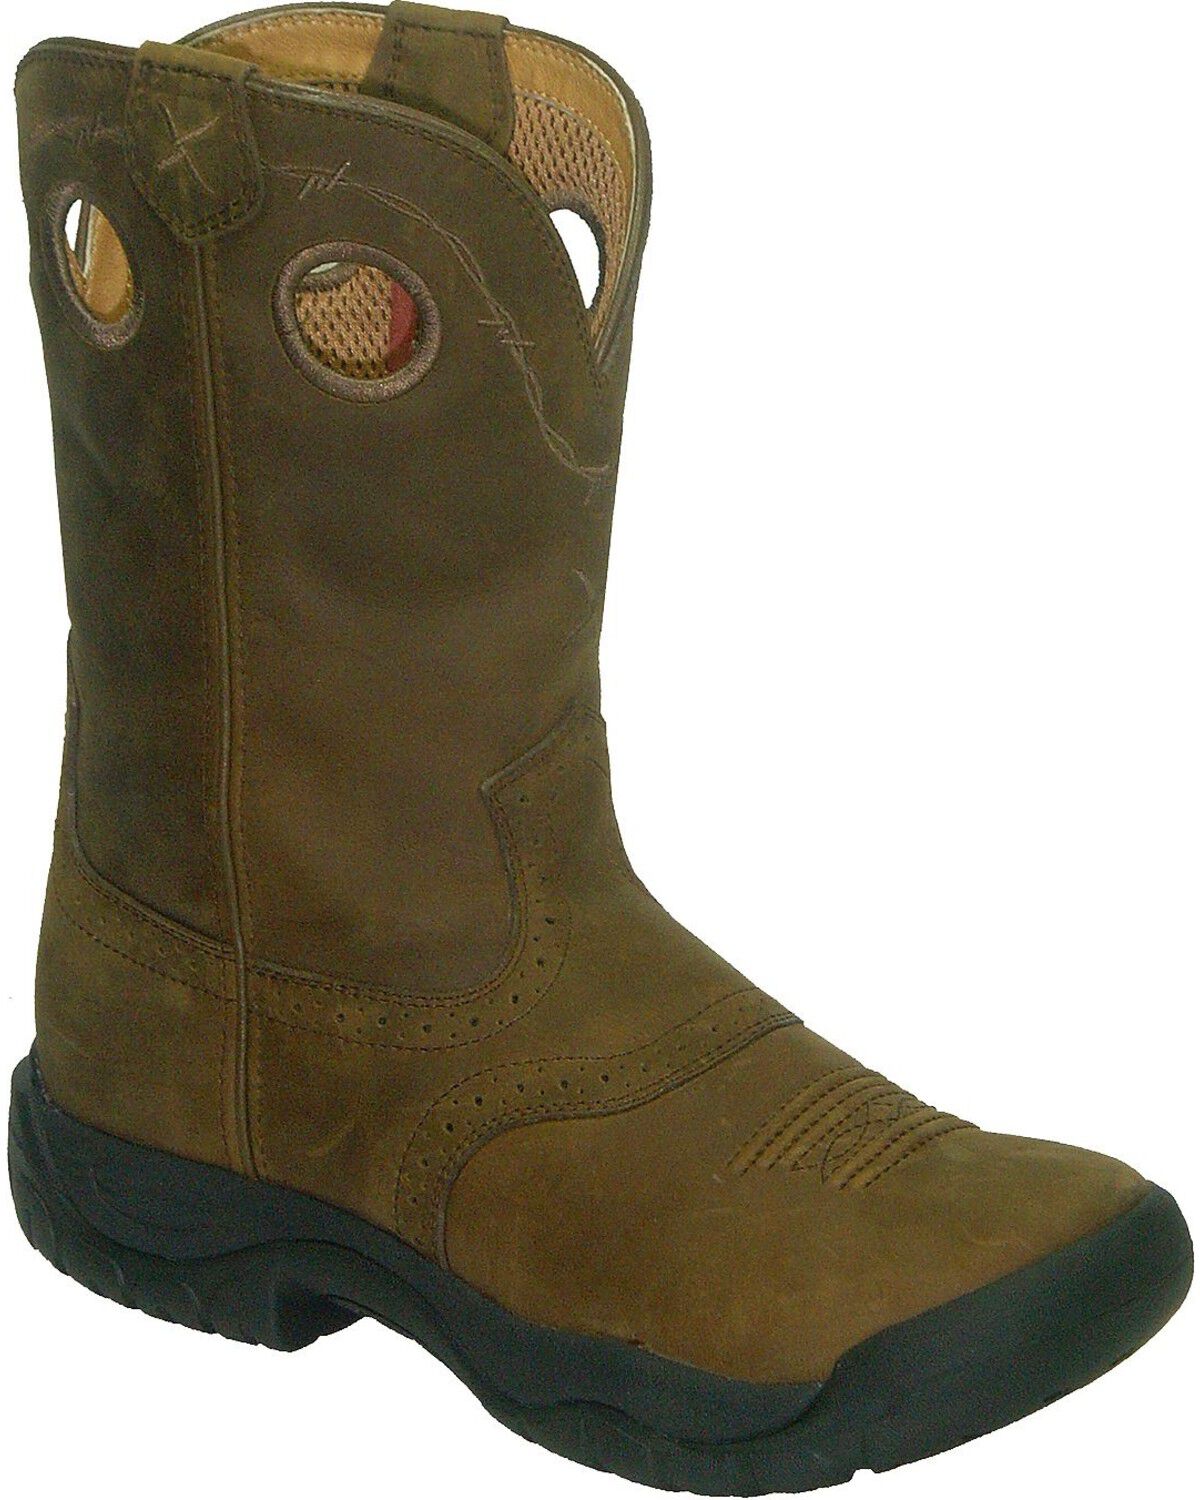 Women's Twisted X Work Boots - Boot Barn